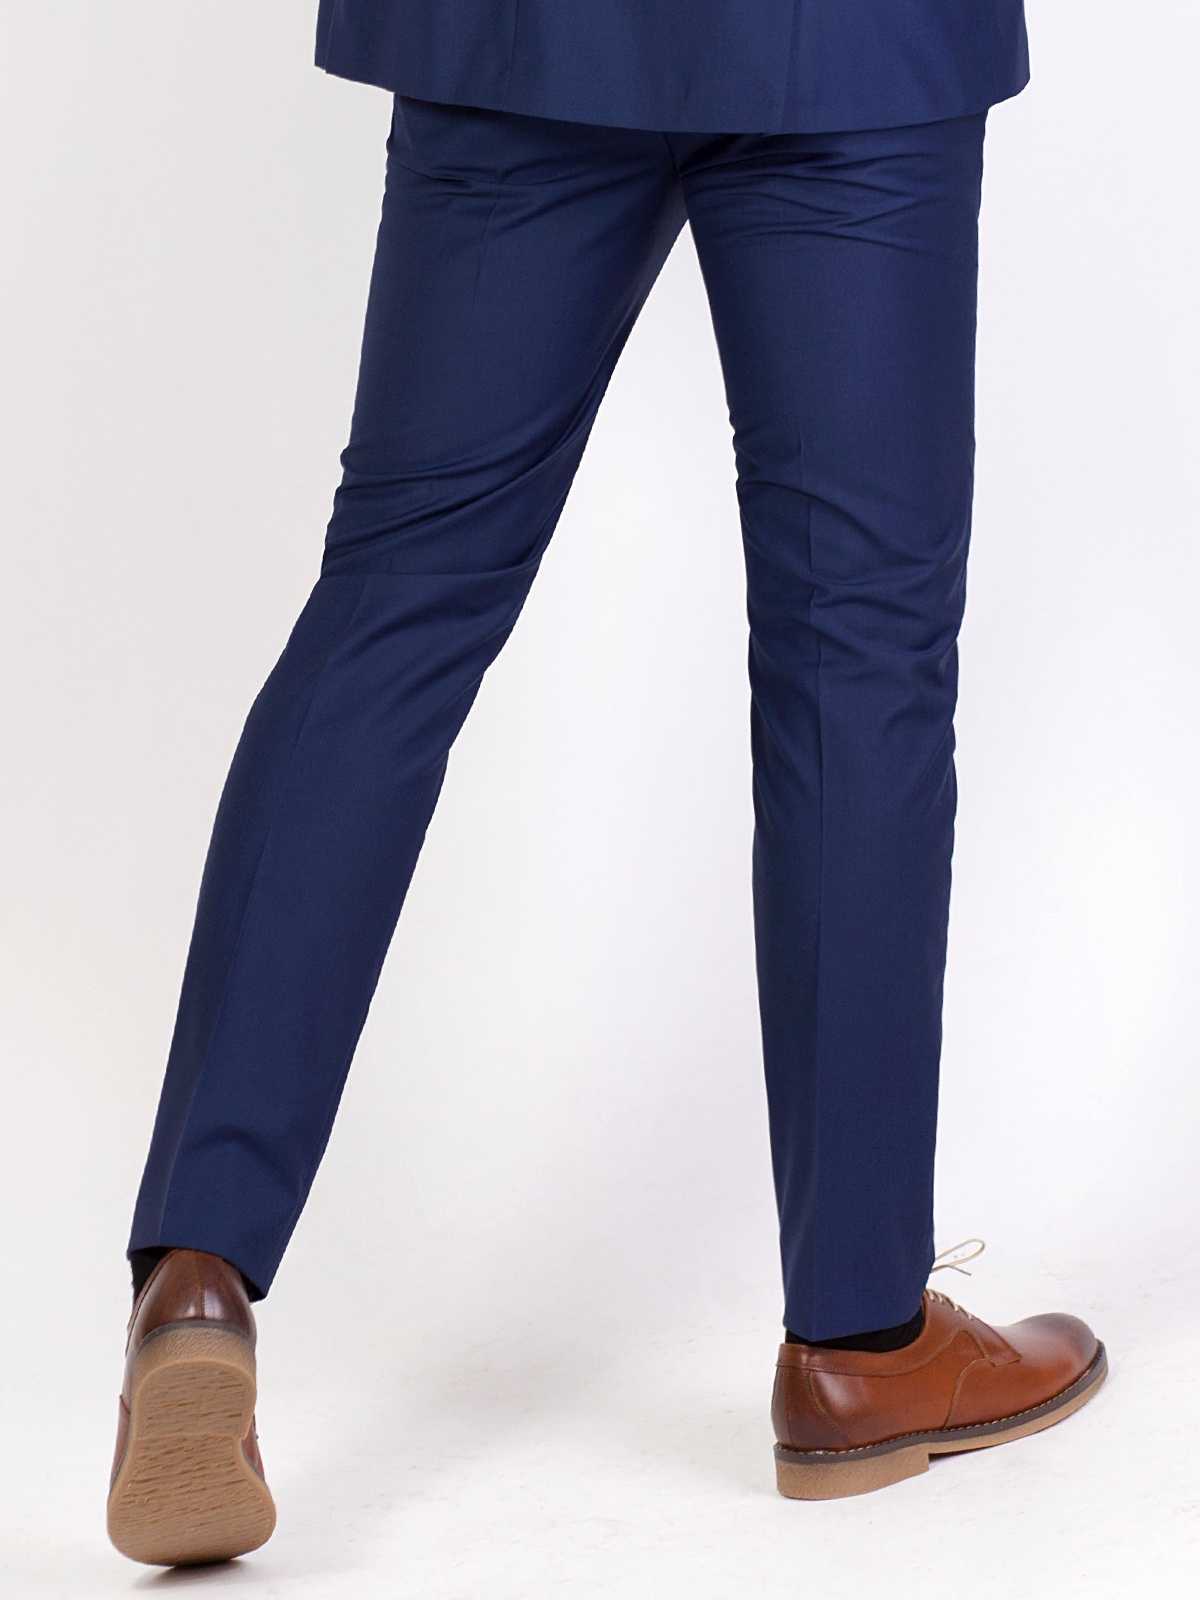  fitted elegant trousers in blue denim  - 63304 € 51.70 img4